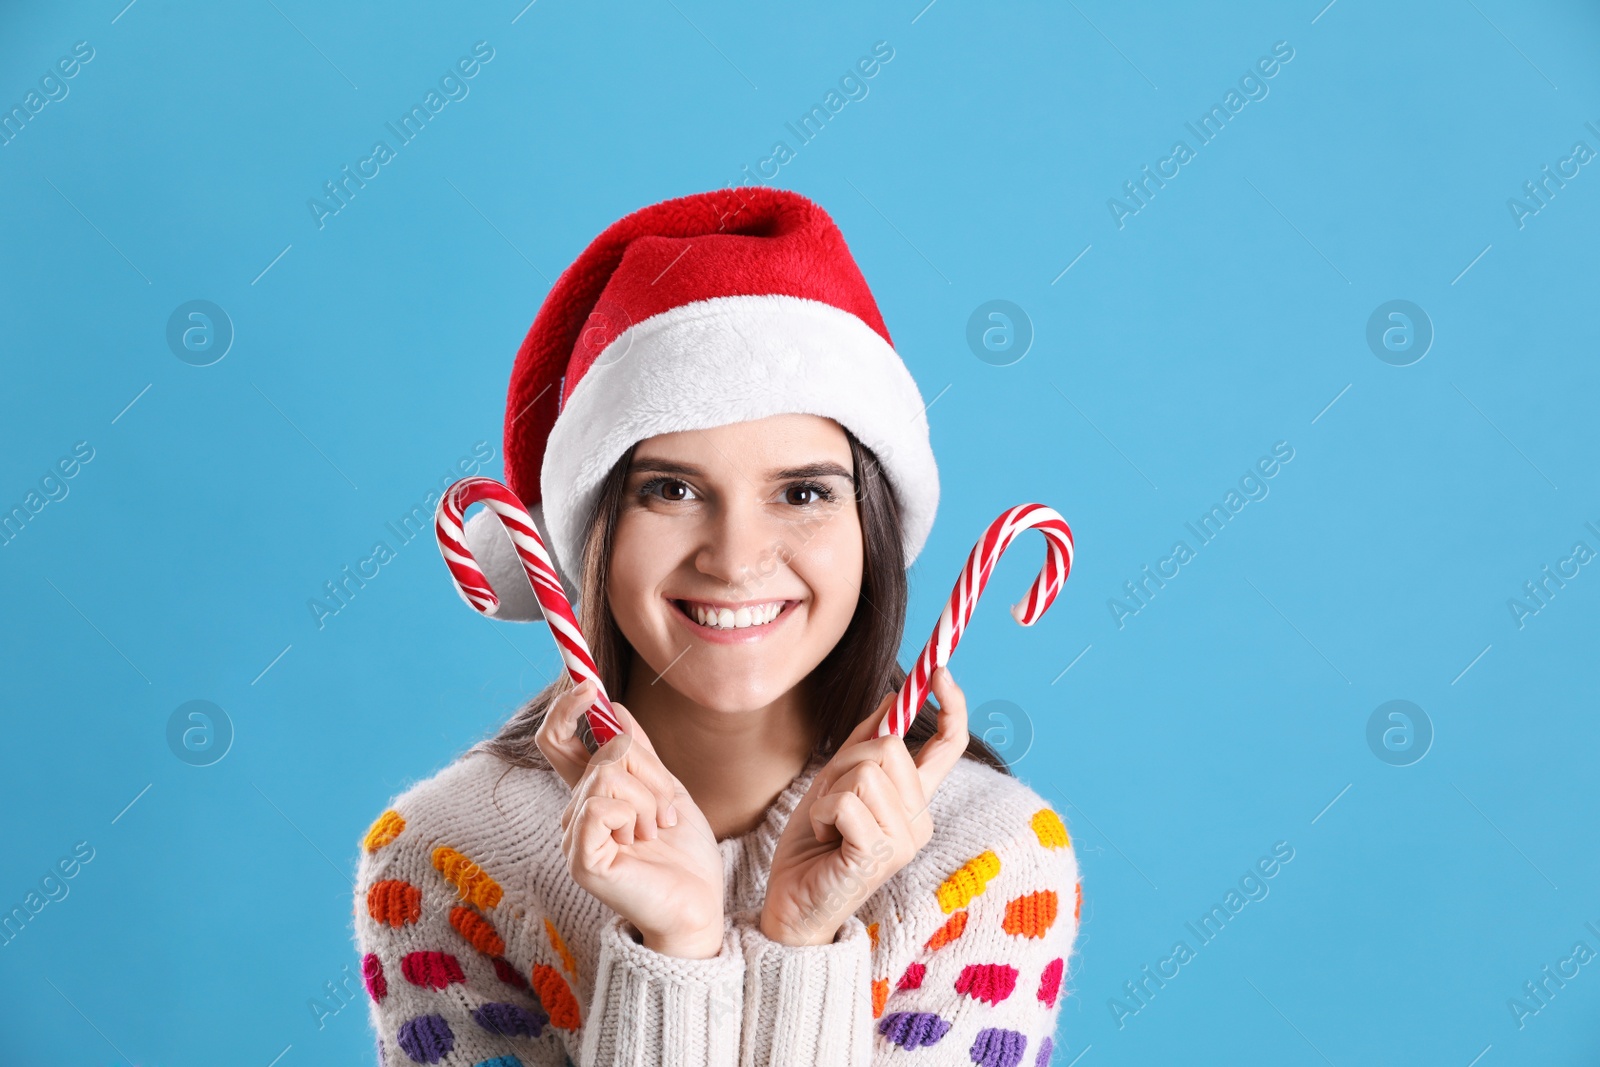 Photo of Pretty woman in Santa hat and festive sweater holding candy canes on light blue background